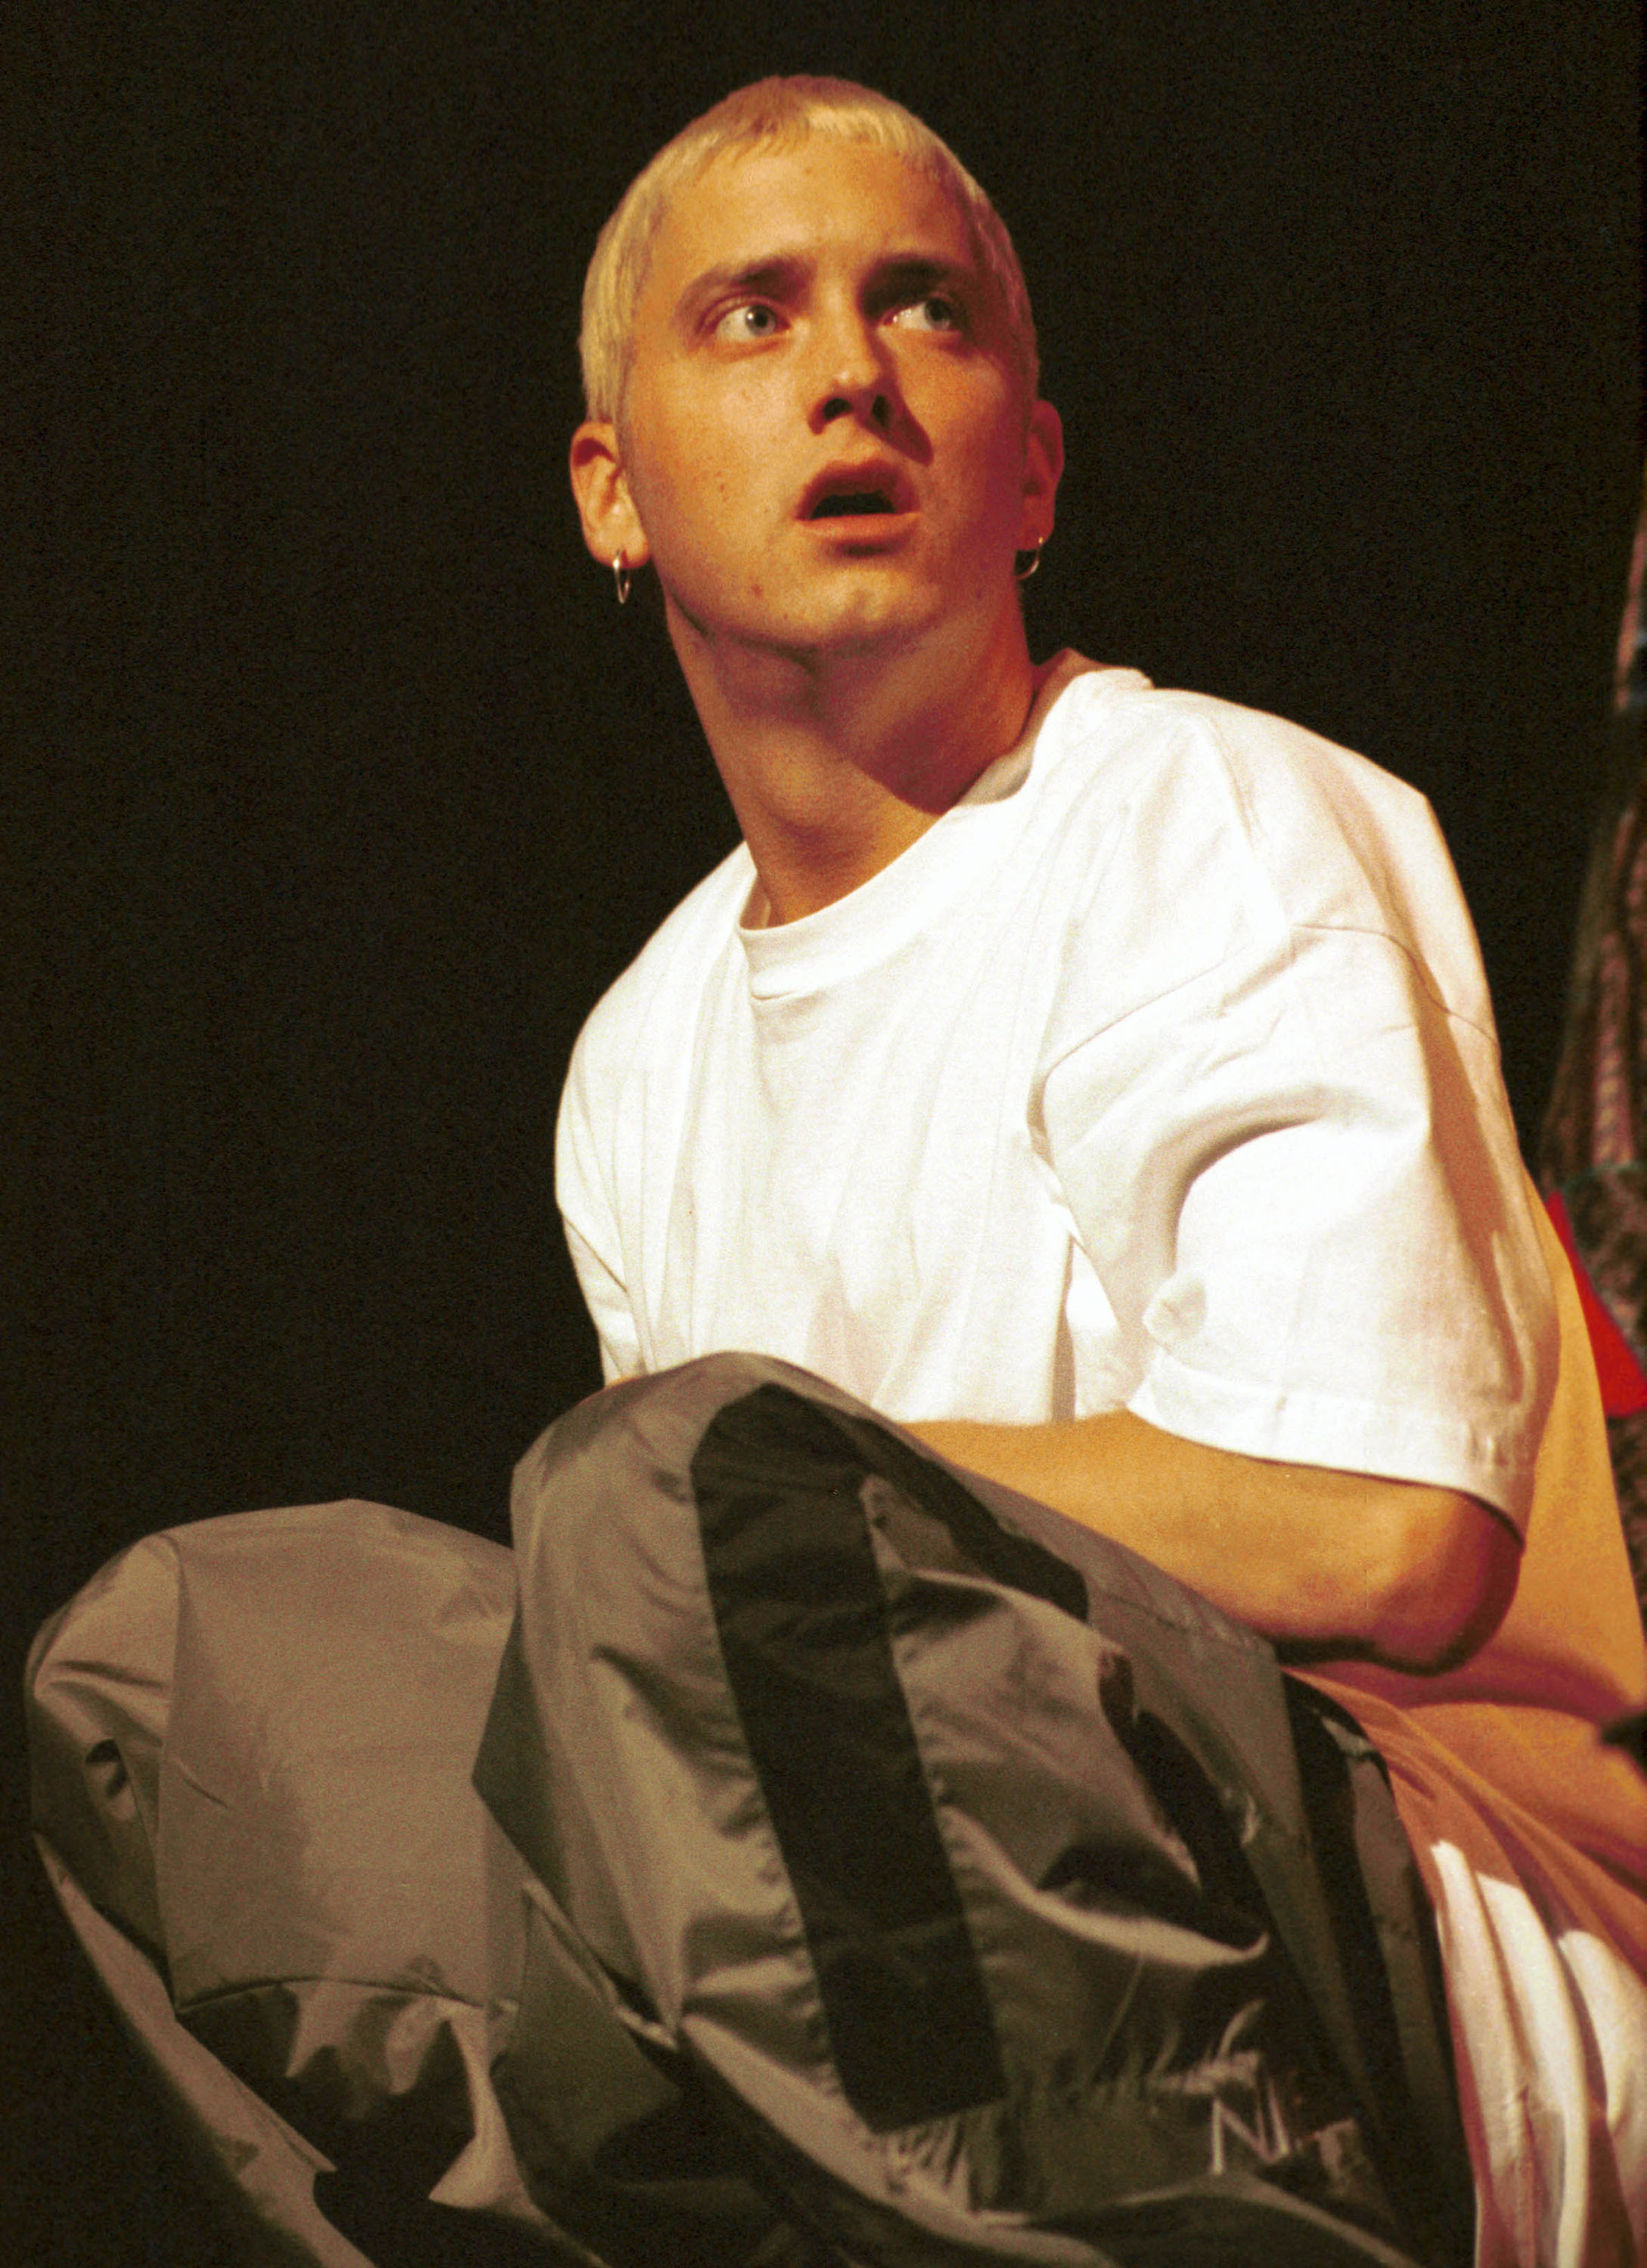 Eminem performs in concert at the House of Blues on May 5, 1999, in Las Vegas, Nevada. | Source: Getty Images